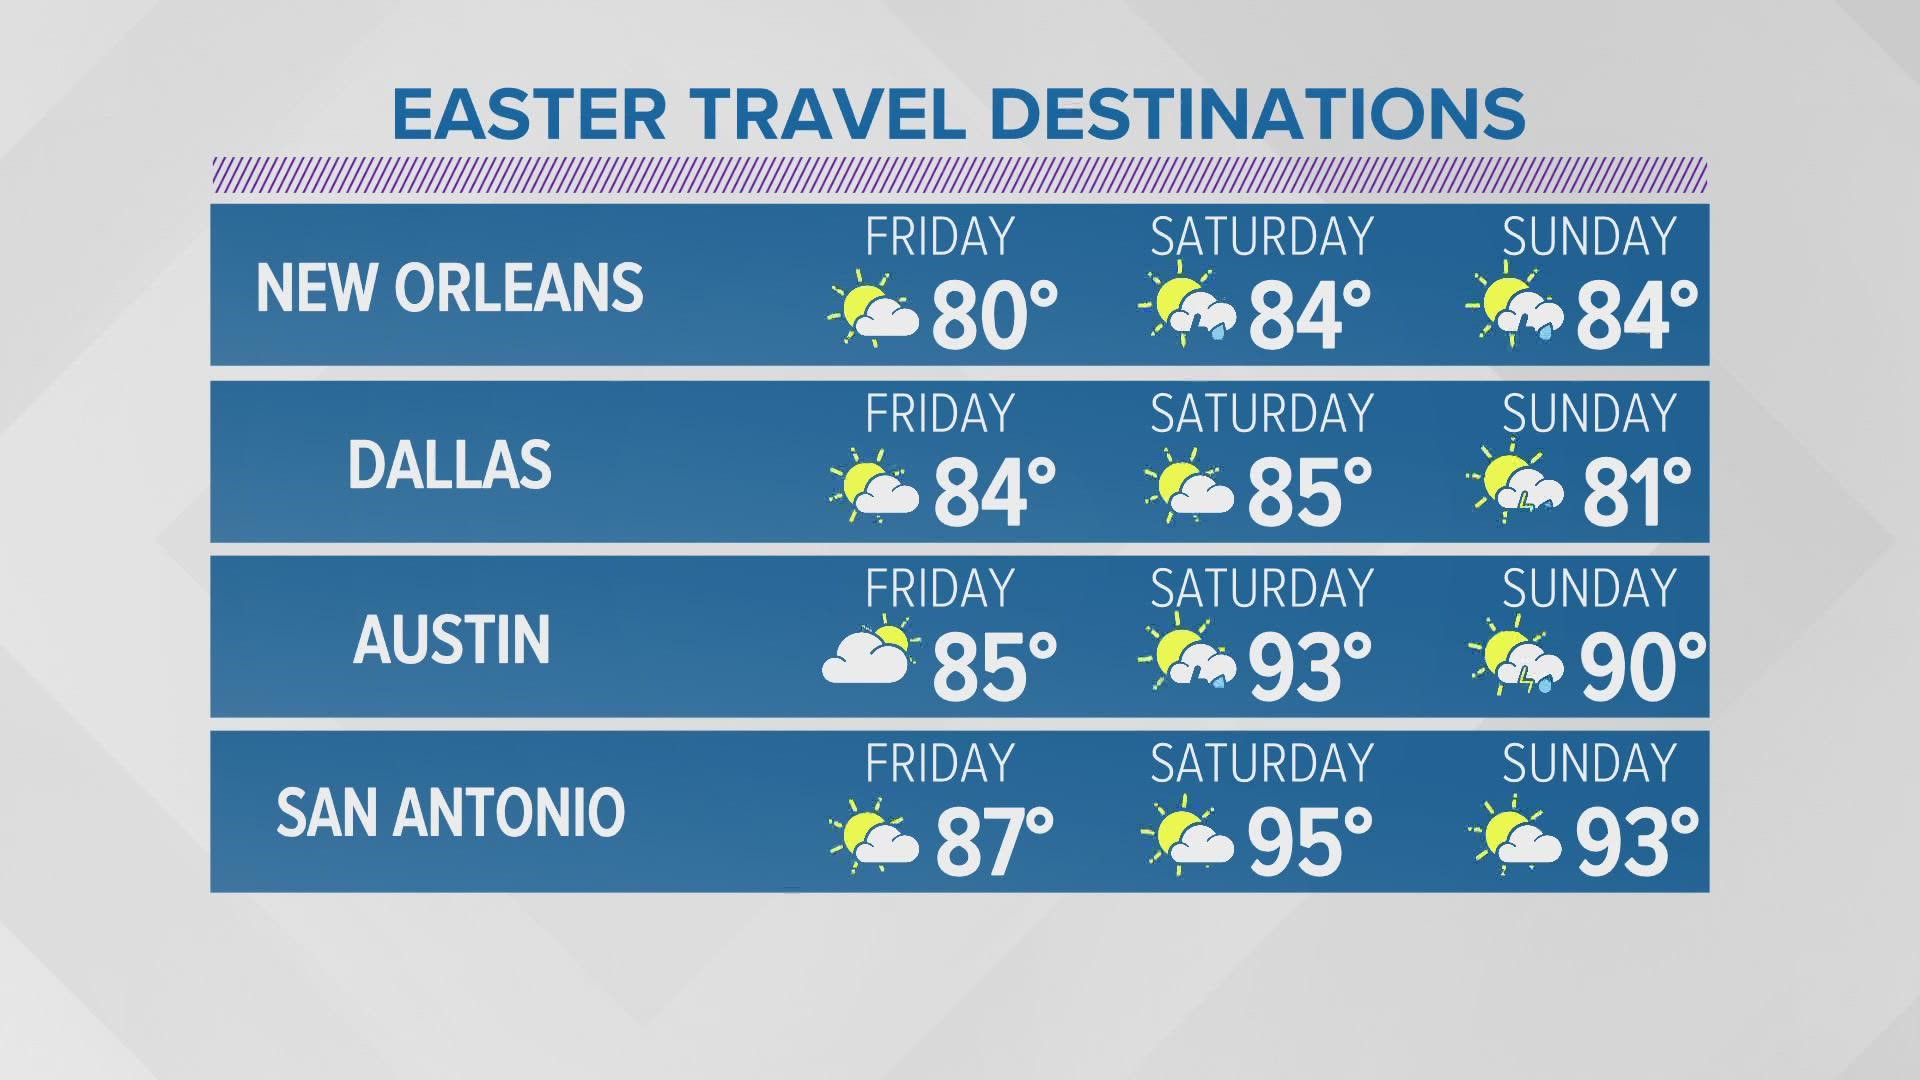 Plan for a hot, humid weekend while celebrating Easter, Passover or other events.